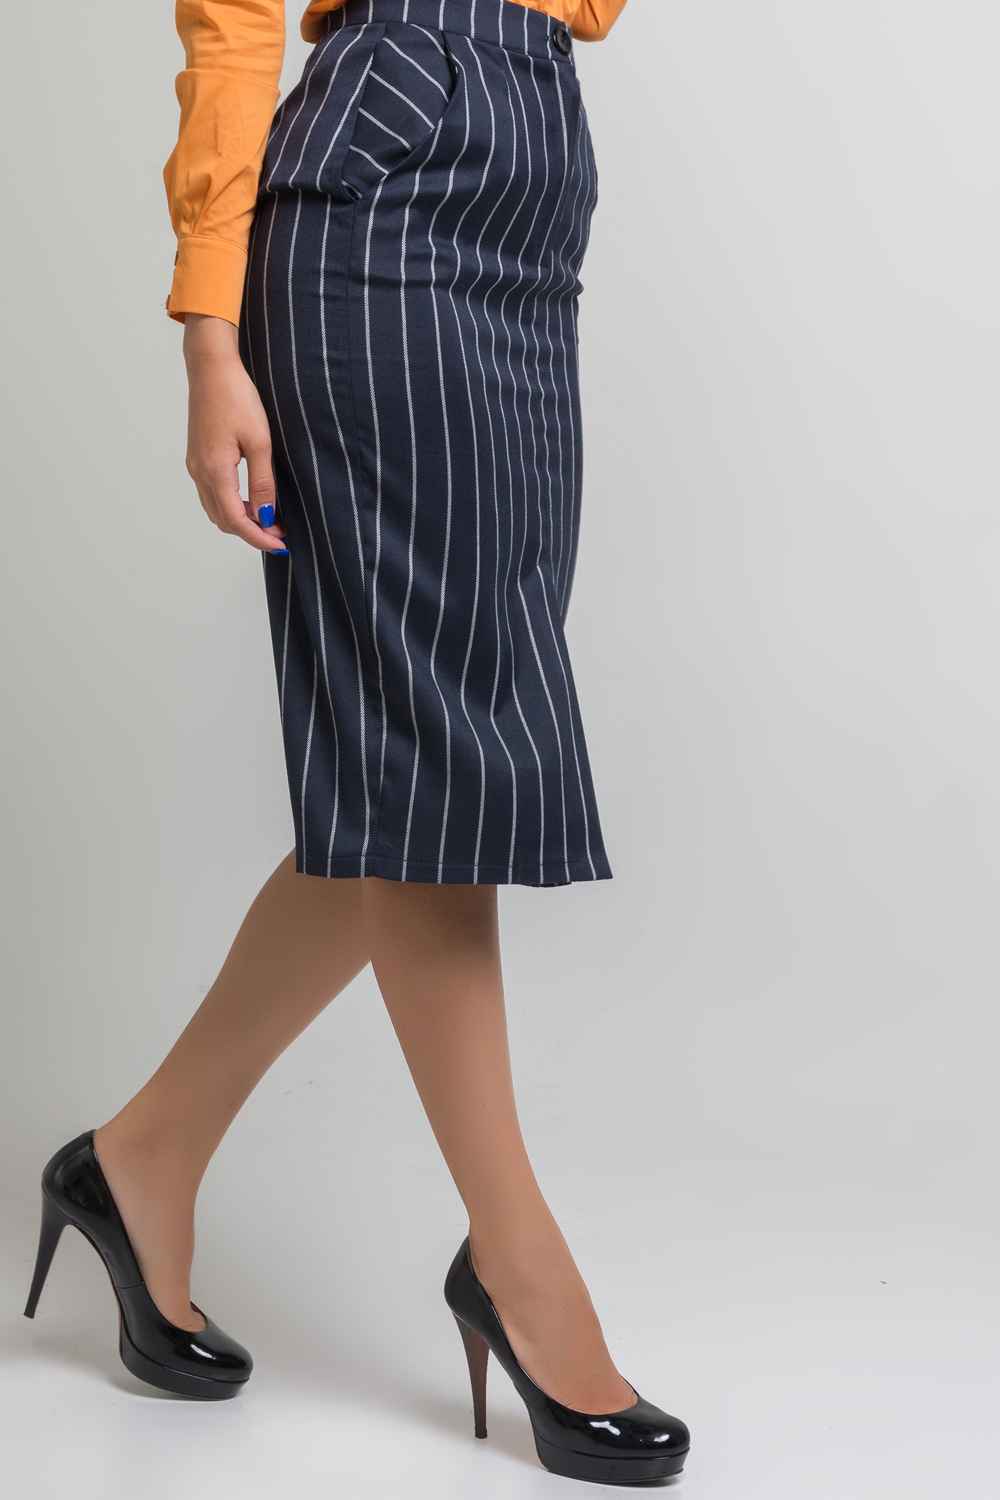 Midi length striped skirt with pockets and front cutout.